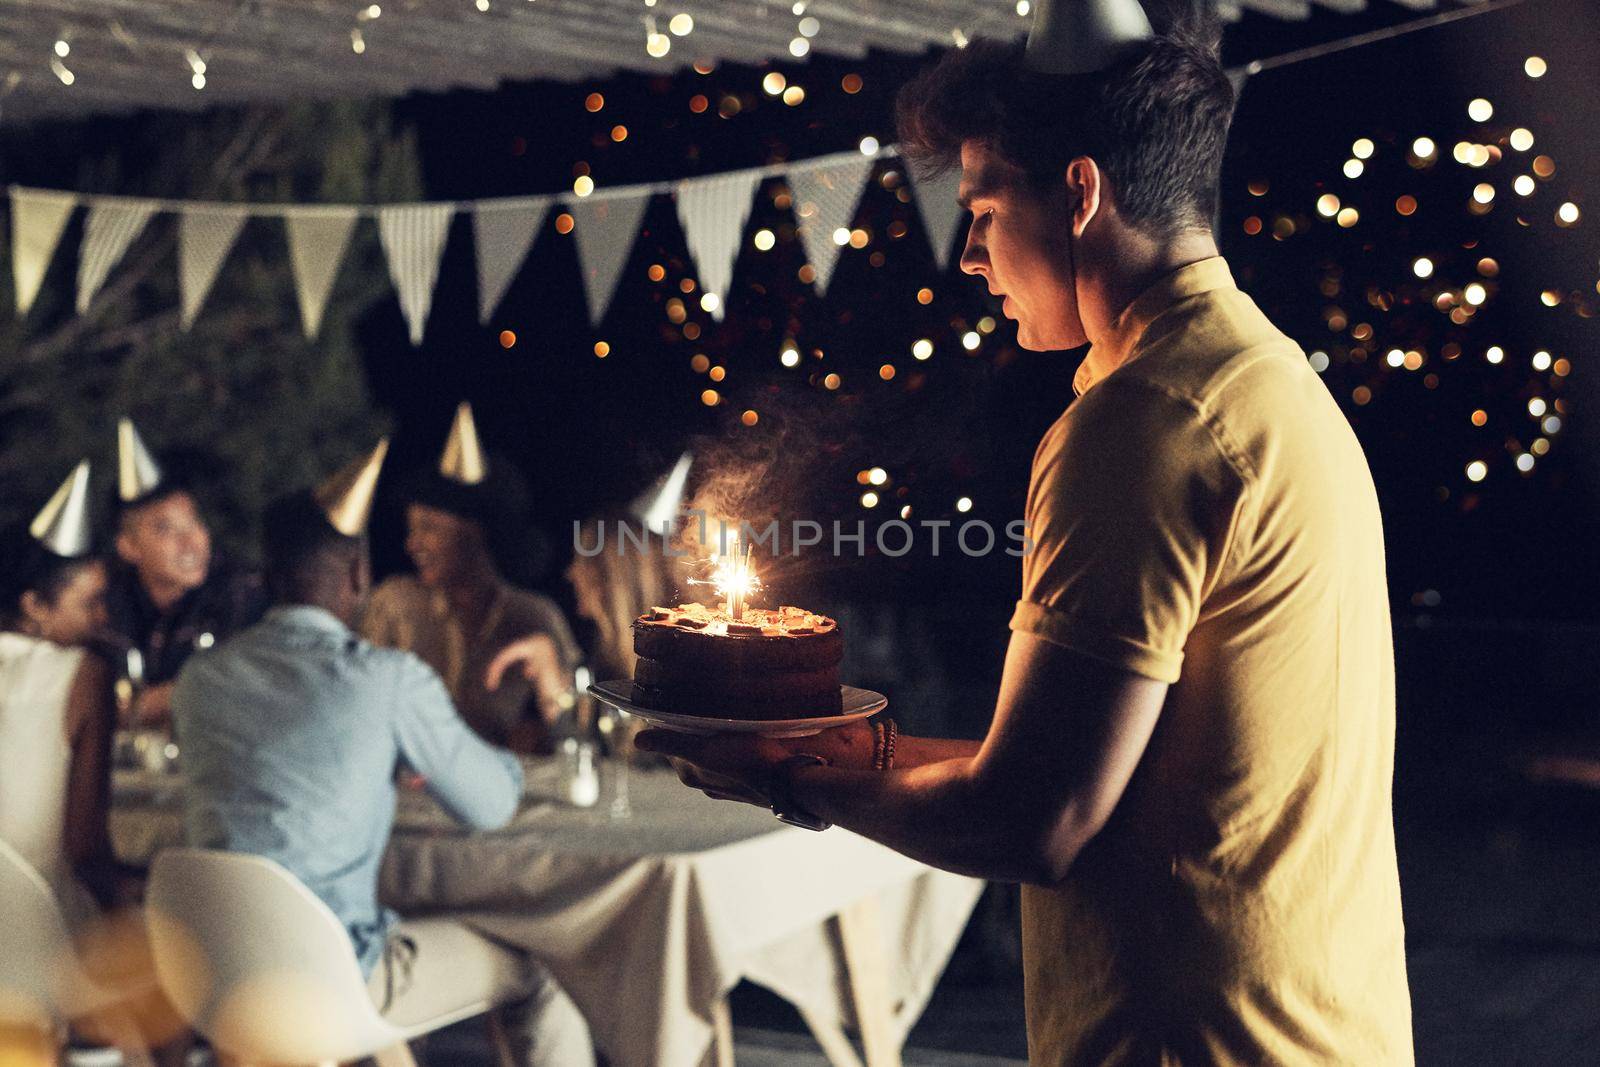 Trying my best to not drop the birthday cake. a handsome young man carrying a cake at a birthday celebration with friends outdoors in the evening